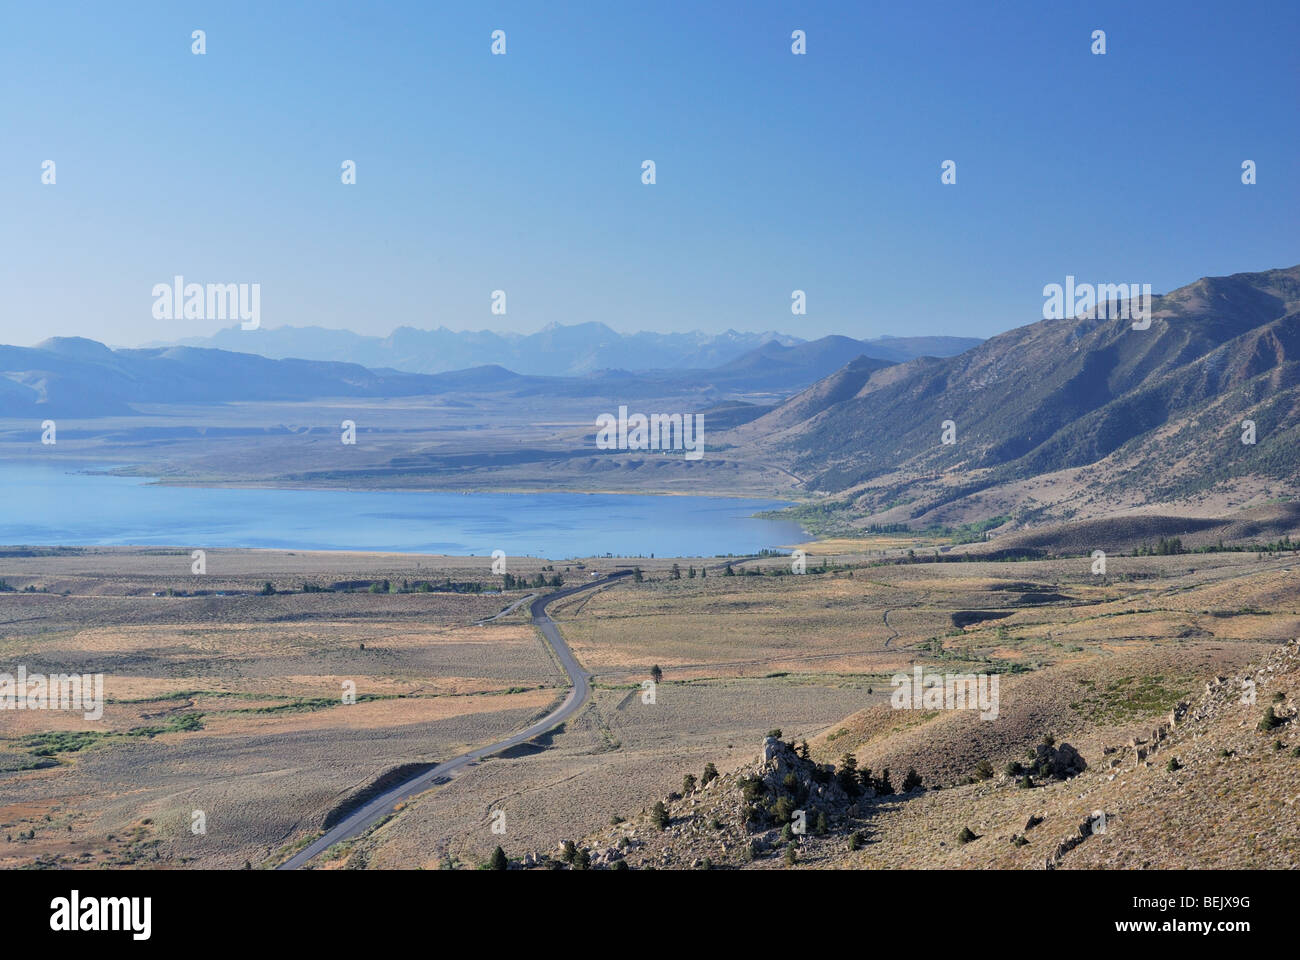 Mono lake and Lee Vining on the Eastern slope of the Sierra Nevada in California on US highway 395, in summer Stock Photo